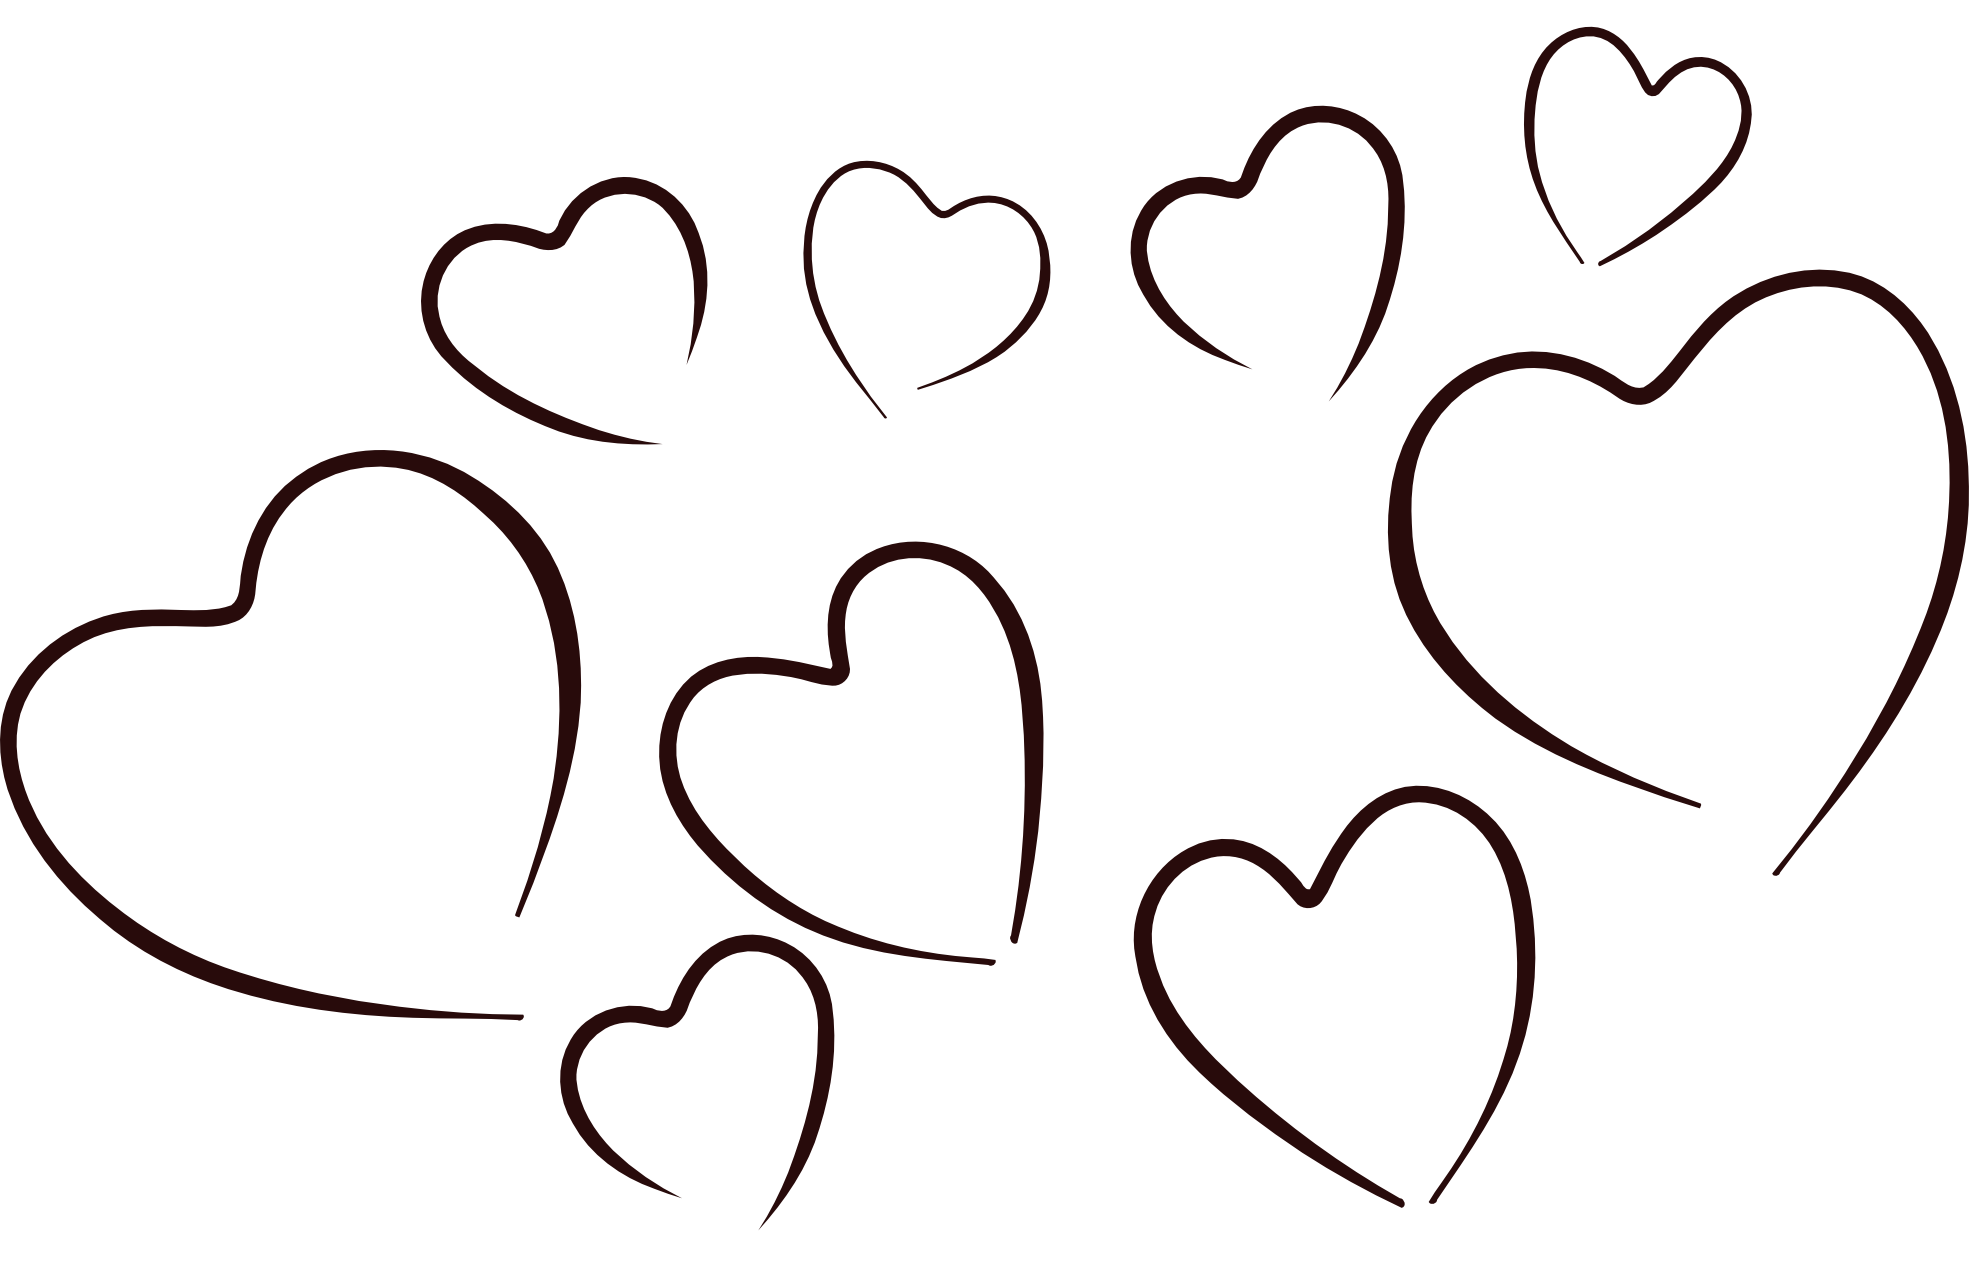 Free Black And White Heart Clipart, Download Free Clip Art.